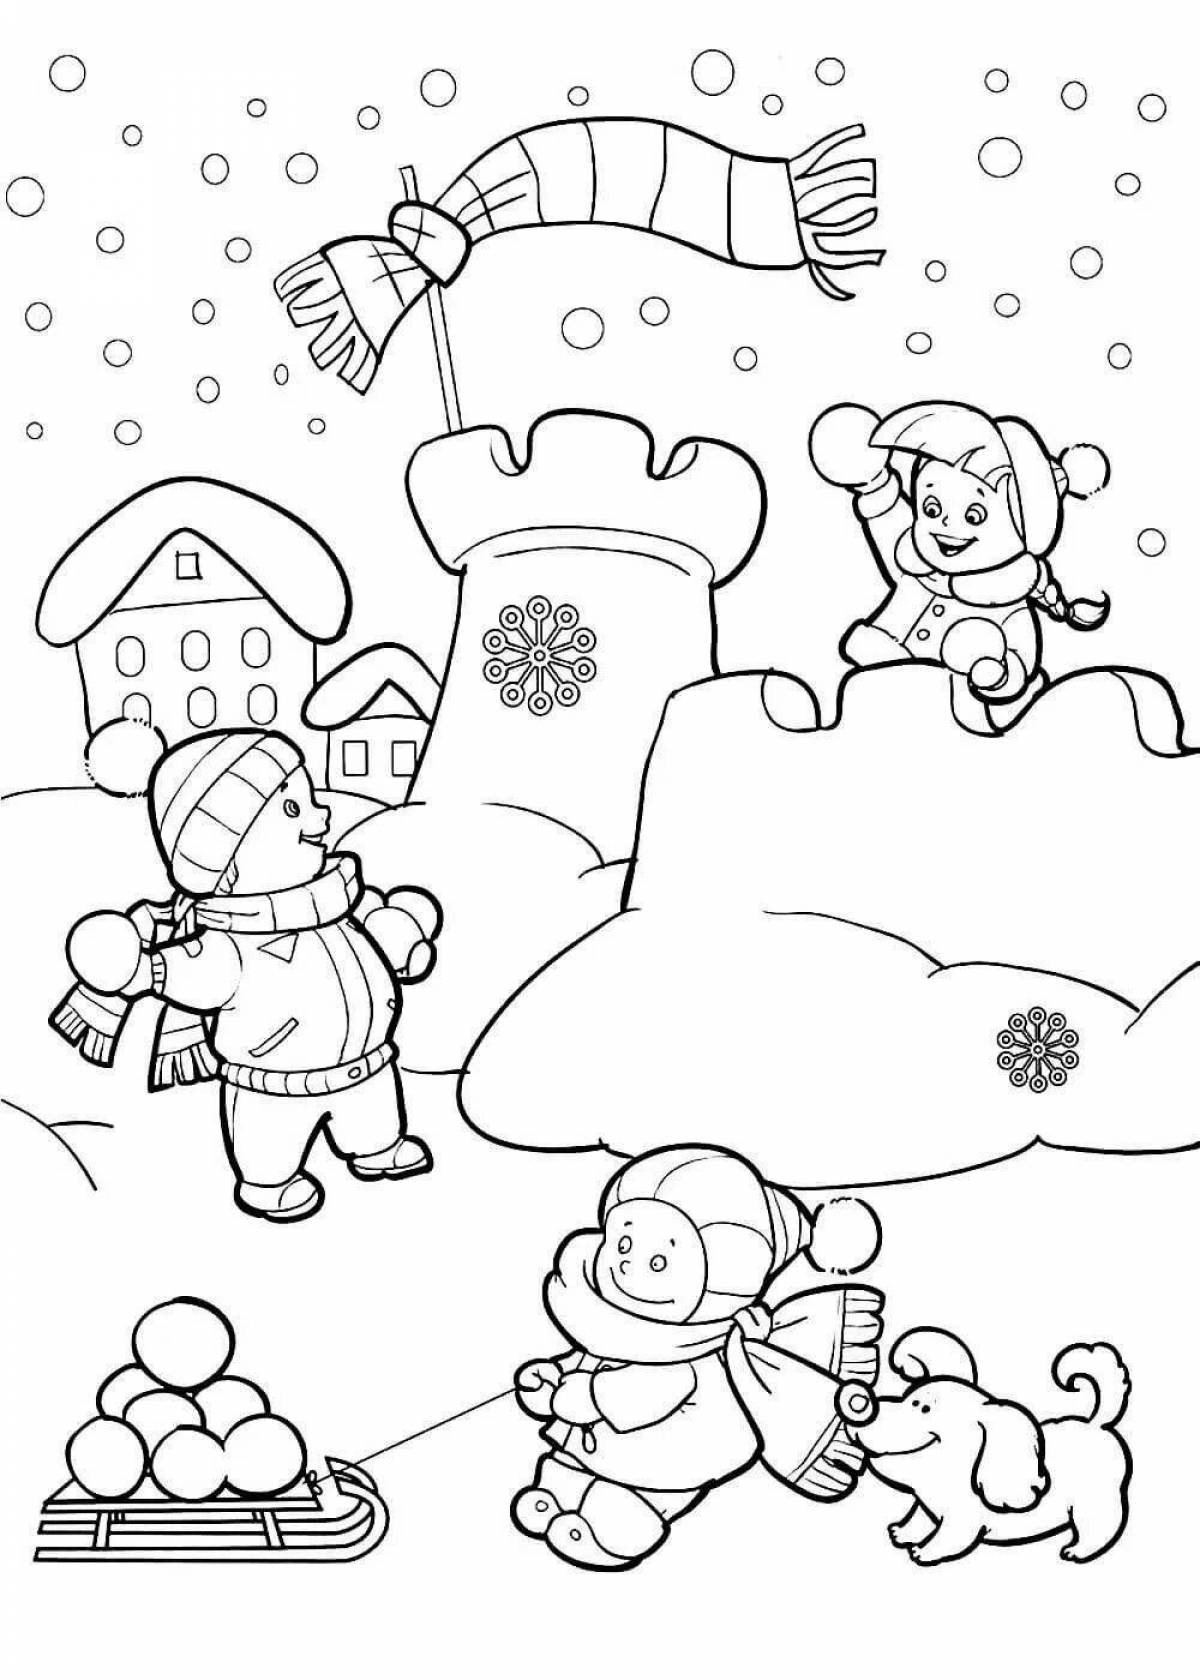 Fabulous Christmas funny coloring book